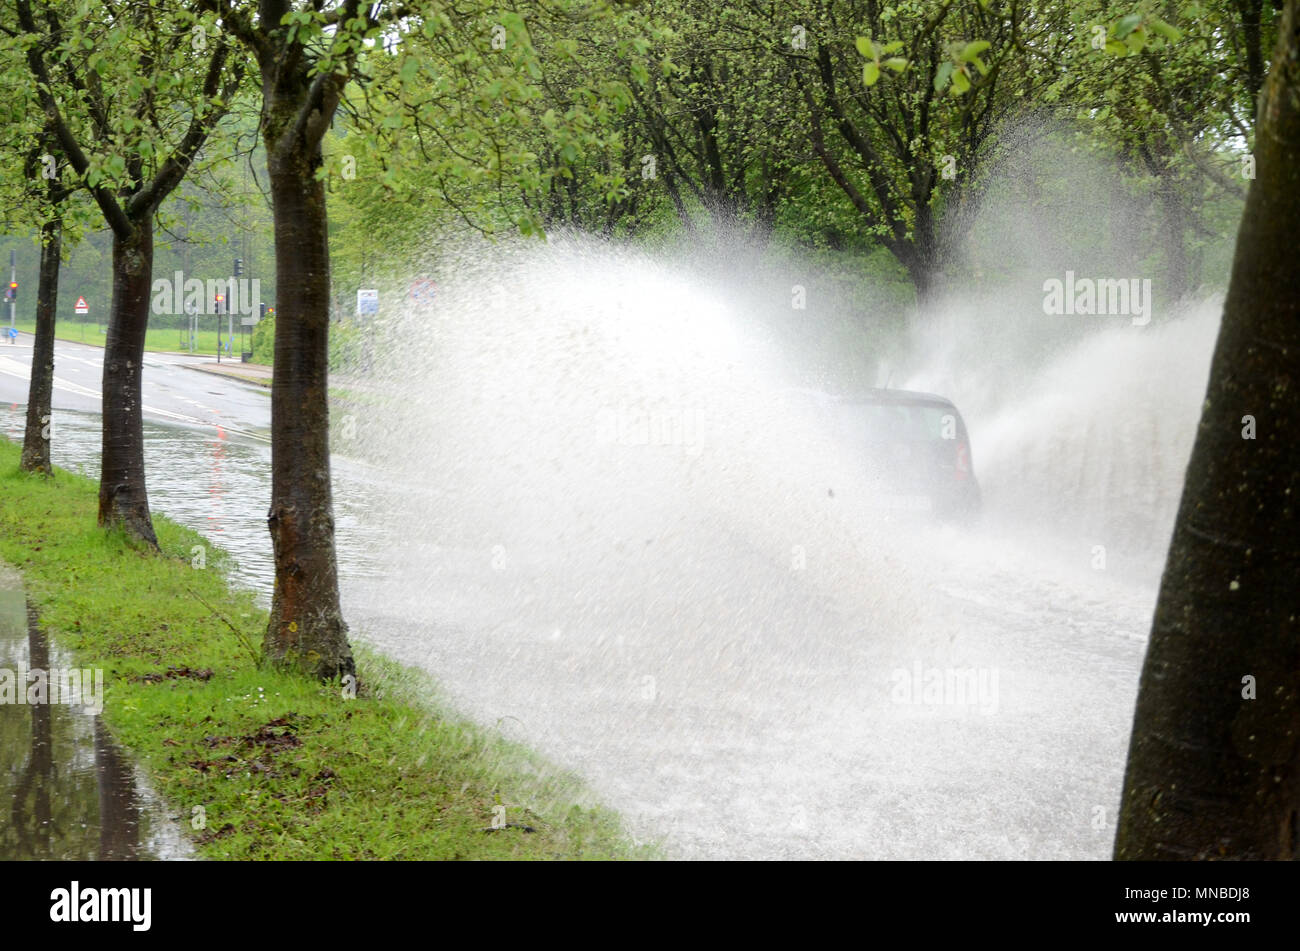 A car hidden in a large splash drives on a road that i flooded because of severe rainfall and bad kept drains. Stock Photo